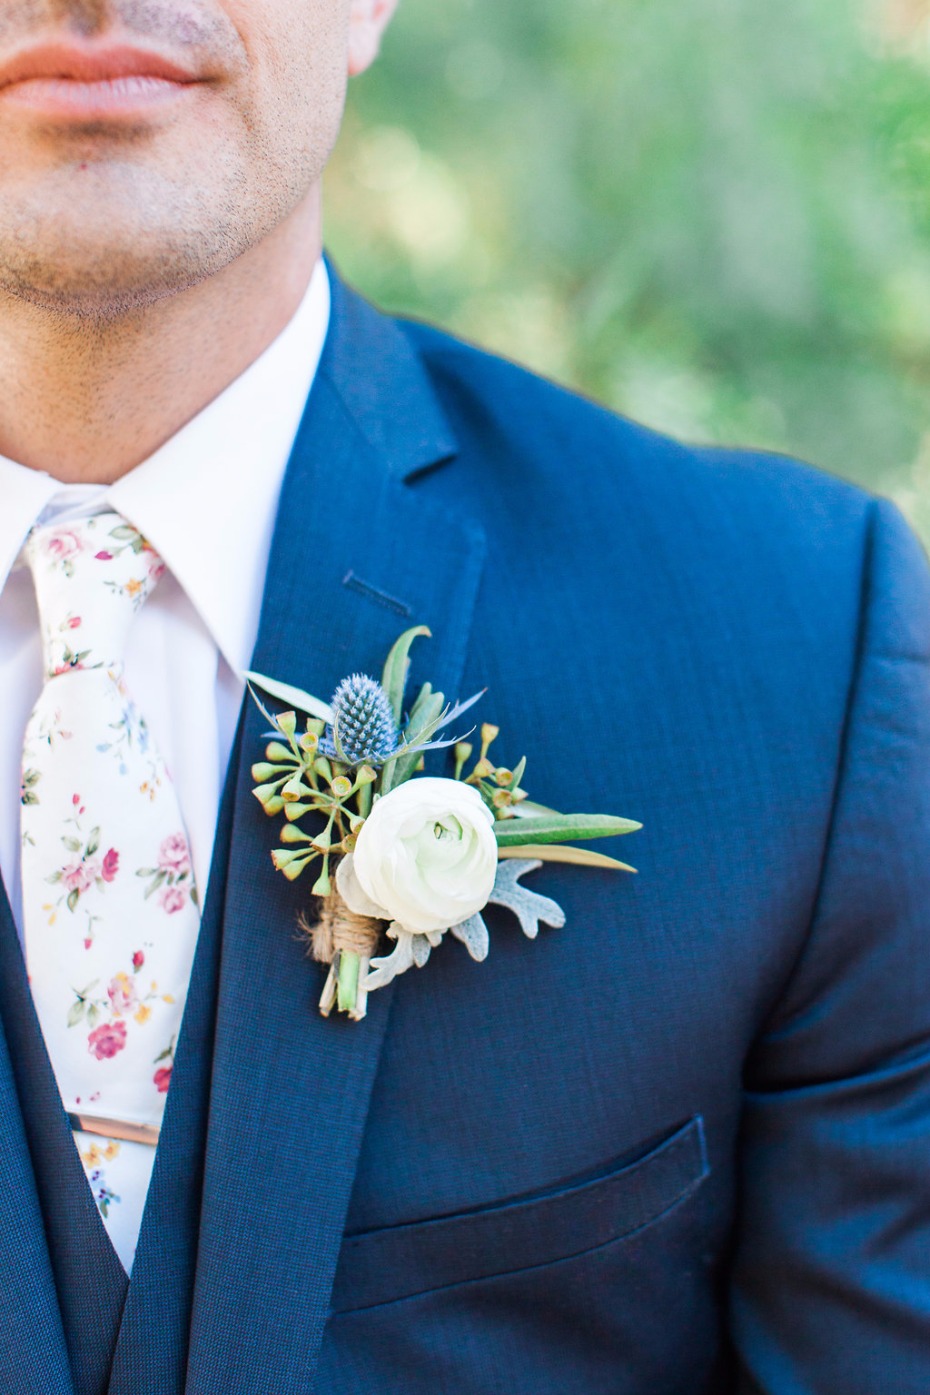 Navy suit with floral tie